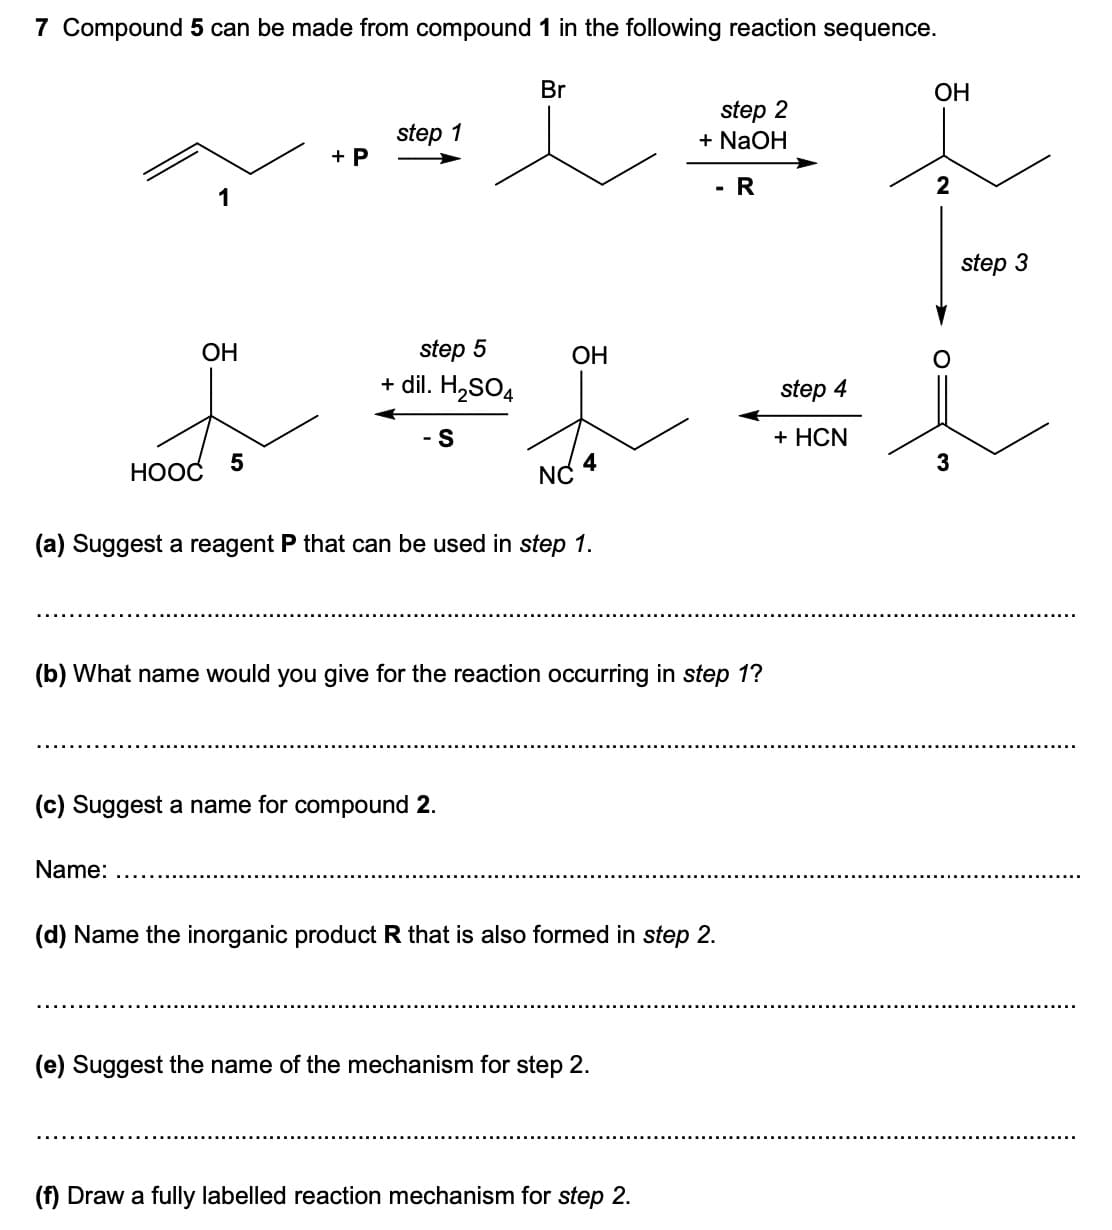 7 Compound 5 can be made from compound 1 in the following reaction sequence.
Br
OH
step 1
step 2
+ NaOH
+ P
1
R
2
OH
OH
step 5
+ dil. H₂SO4
I
- S
5
HOOC
4
NC
(a) Suggest a reagent P that can be used in step 1.
(b) What name would you give for the reaction occurring in step 1?
(c) Suggest a name for compound 2.
Name:
(d) Name the inorganic product R that is also formed in step 2.
(e) Suggest the name of the mechanism for step 2.
(f) Draw a fully labelled reaction mechanism for step 2.
step 4
+ HCN
step 3